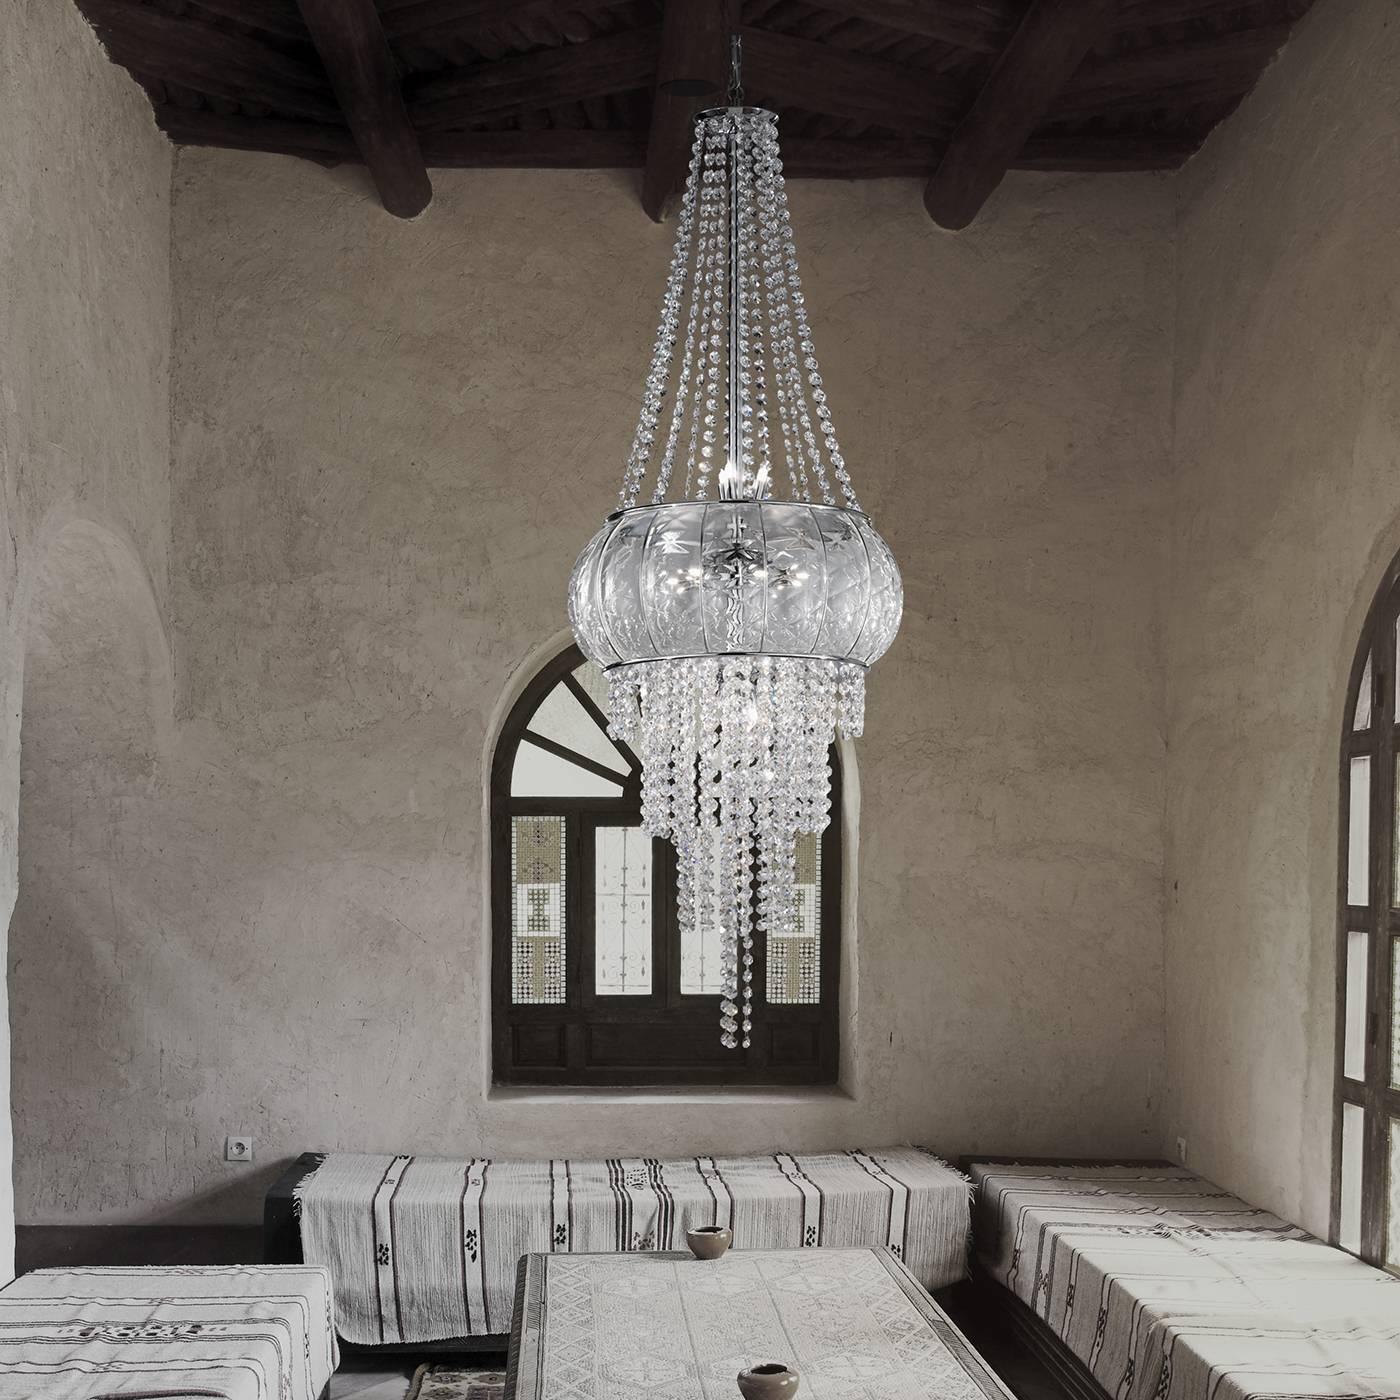 This superb chandelier will make a statement in any decor, providing a luxurious source of light for a large room. Its exquisite craftsmanship is evident in the mouth-blown Murano glass central structure with its texture enriched by the 